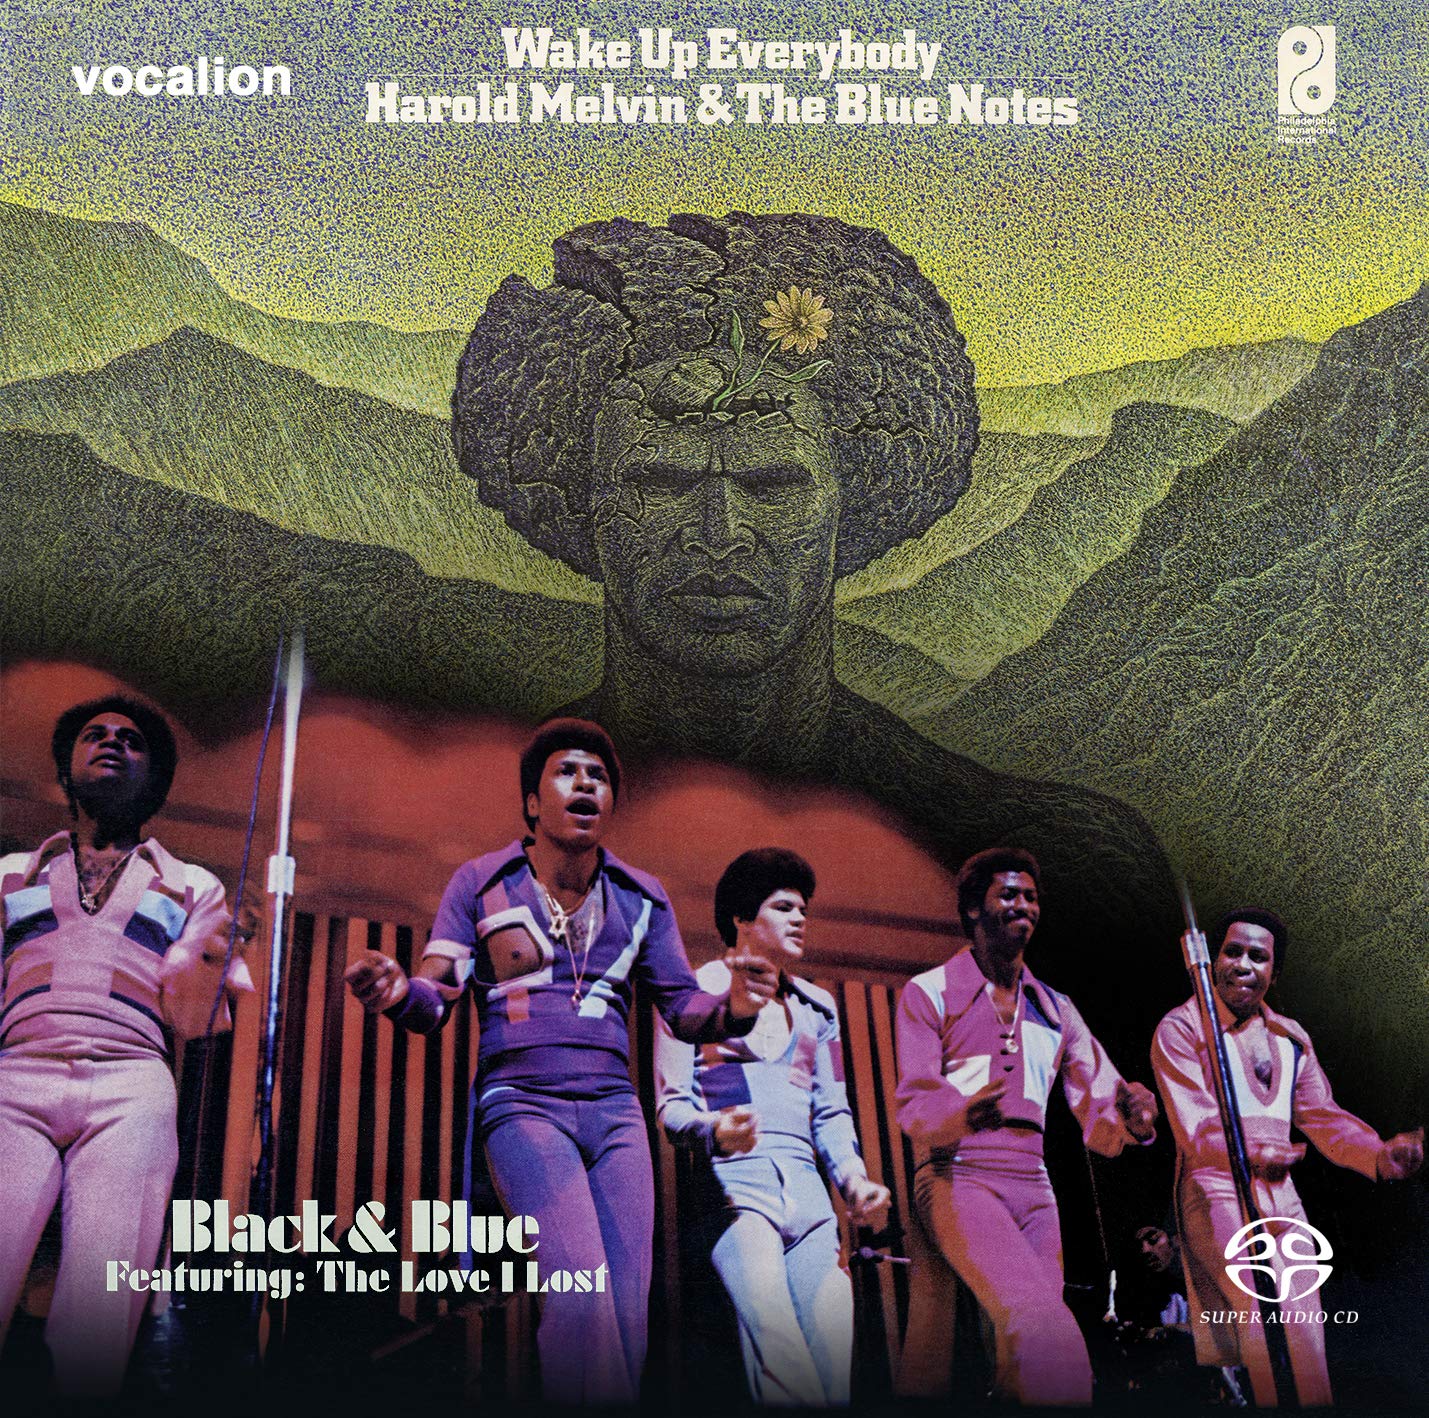 Harold Melvin & The Blue Notes – Black & Blue & Wake Up Everybody (1973 & 1975) [Reissue 2020] MCH SACD ISO + Hi-Res FLAC